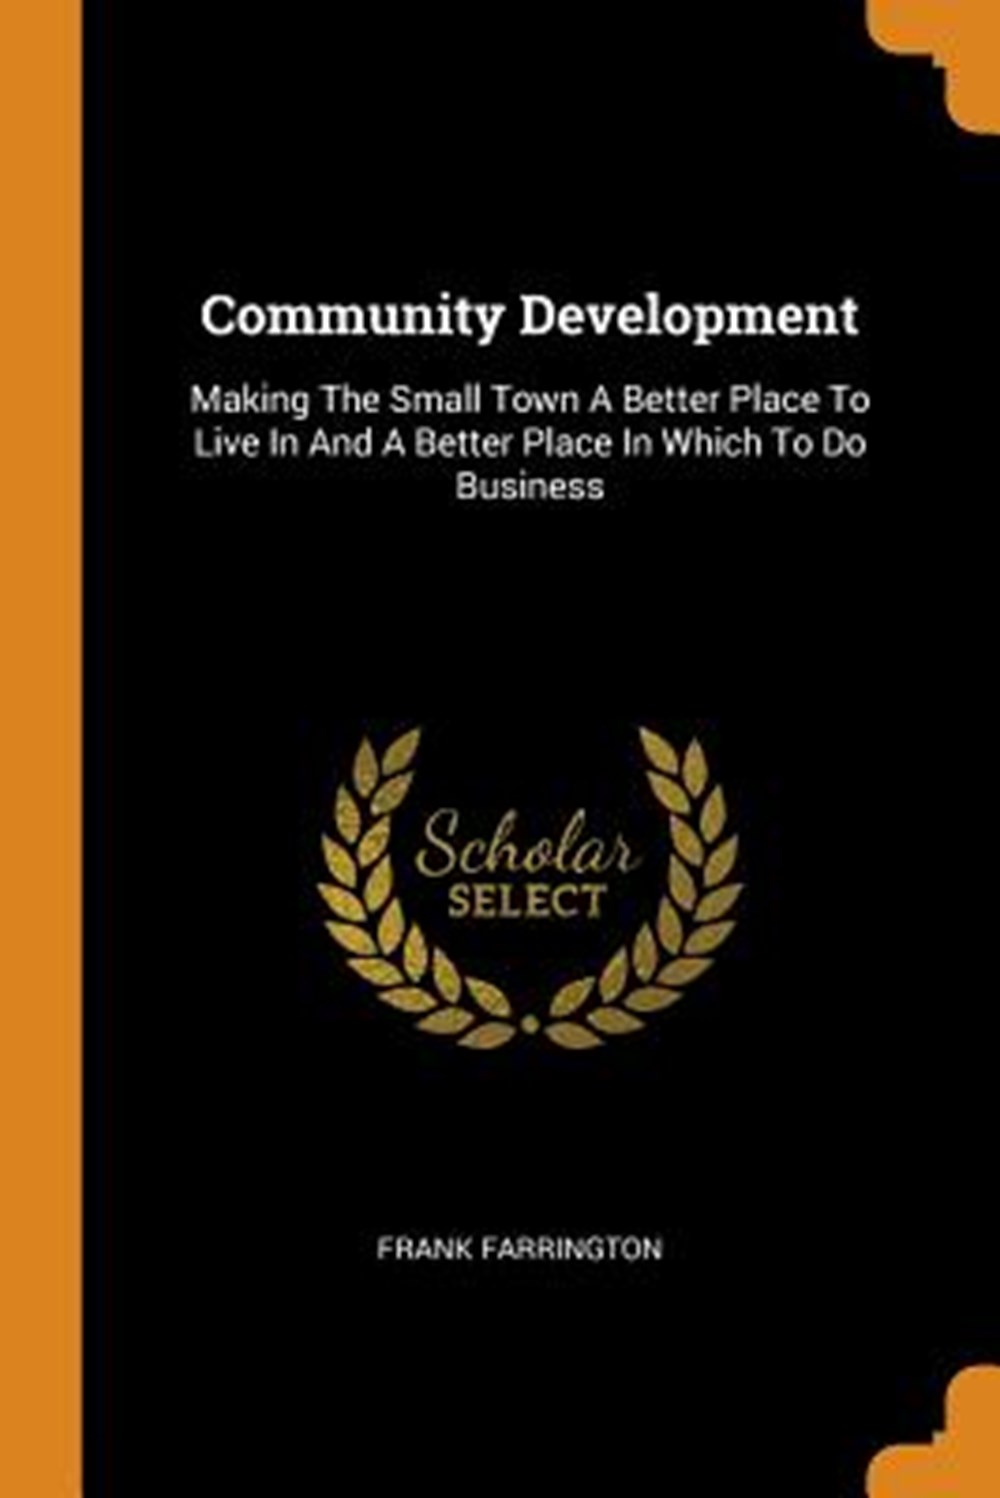 Community Development Making the Small Town a Better Place to Live in and a Better Place in Which to